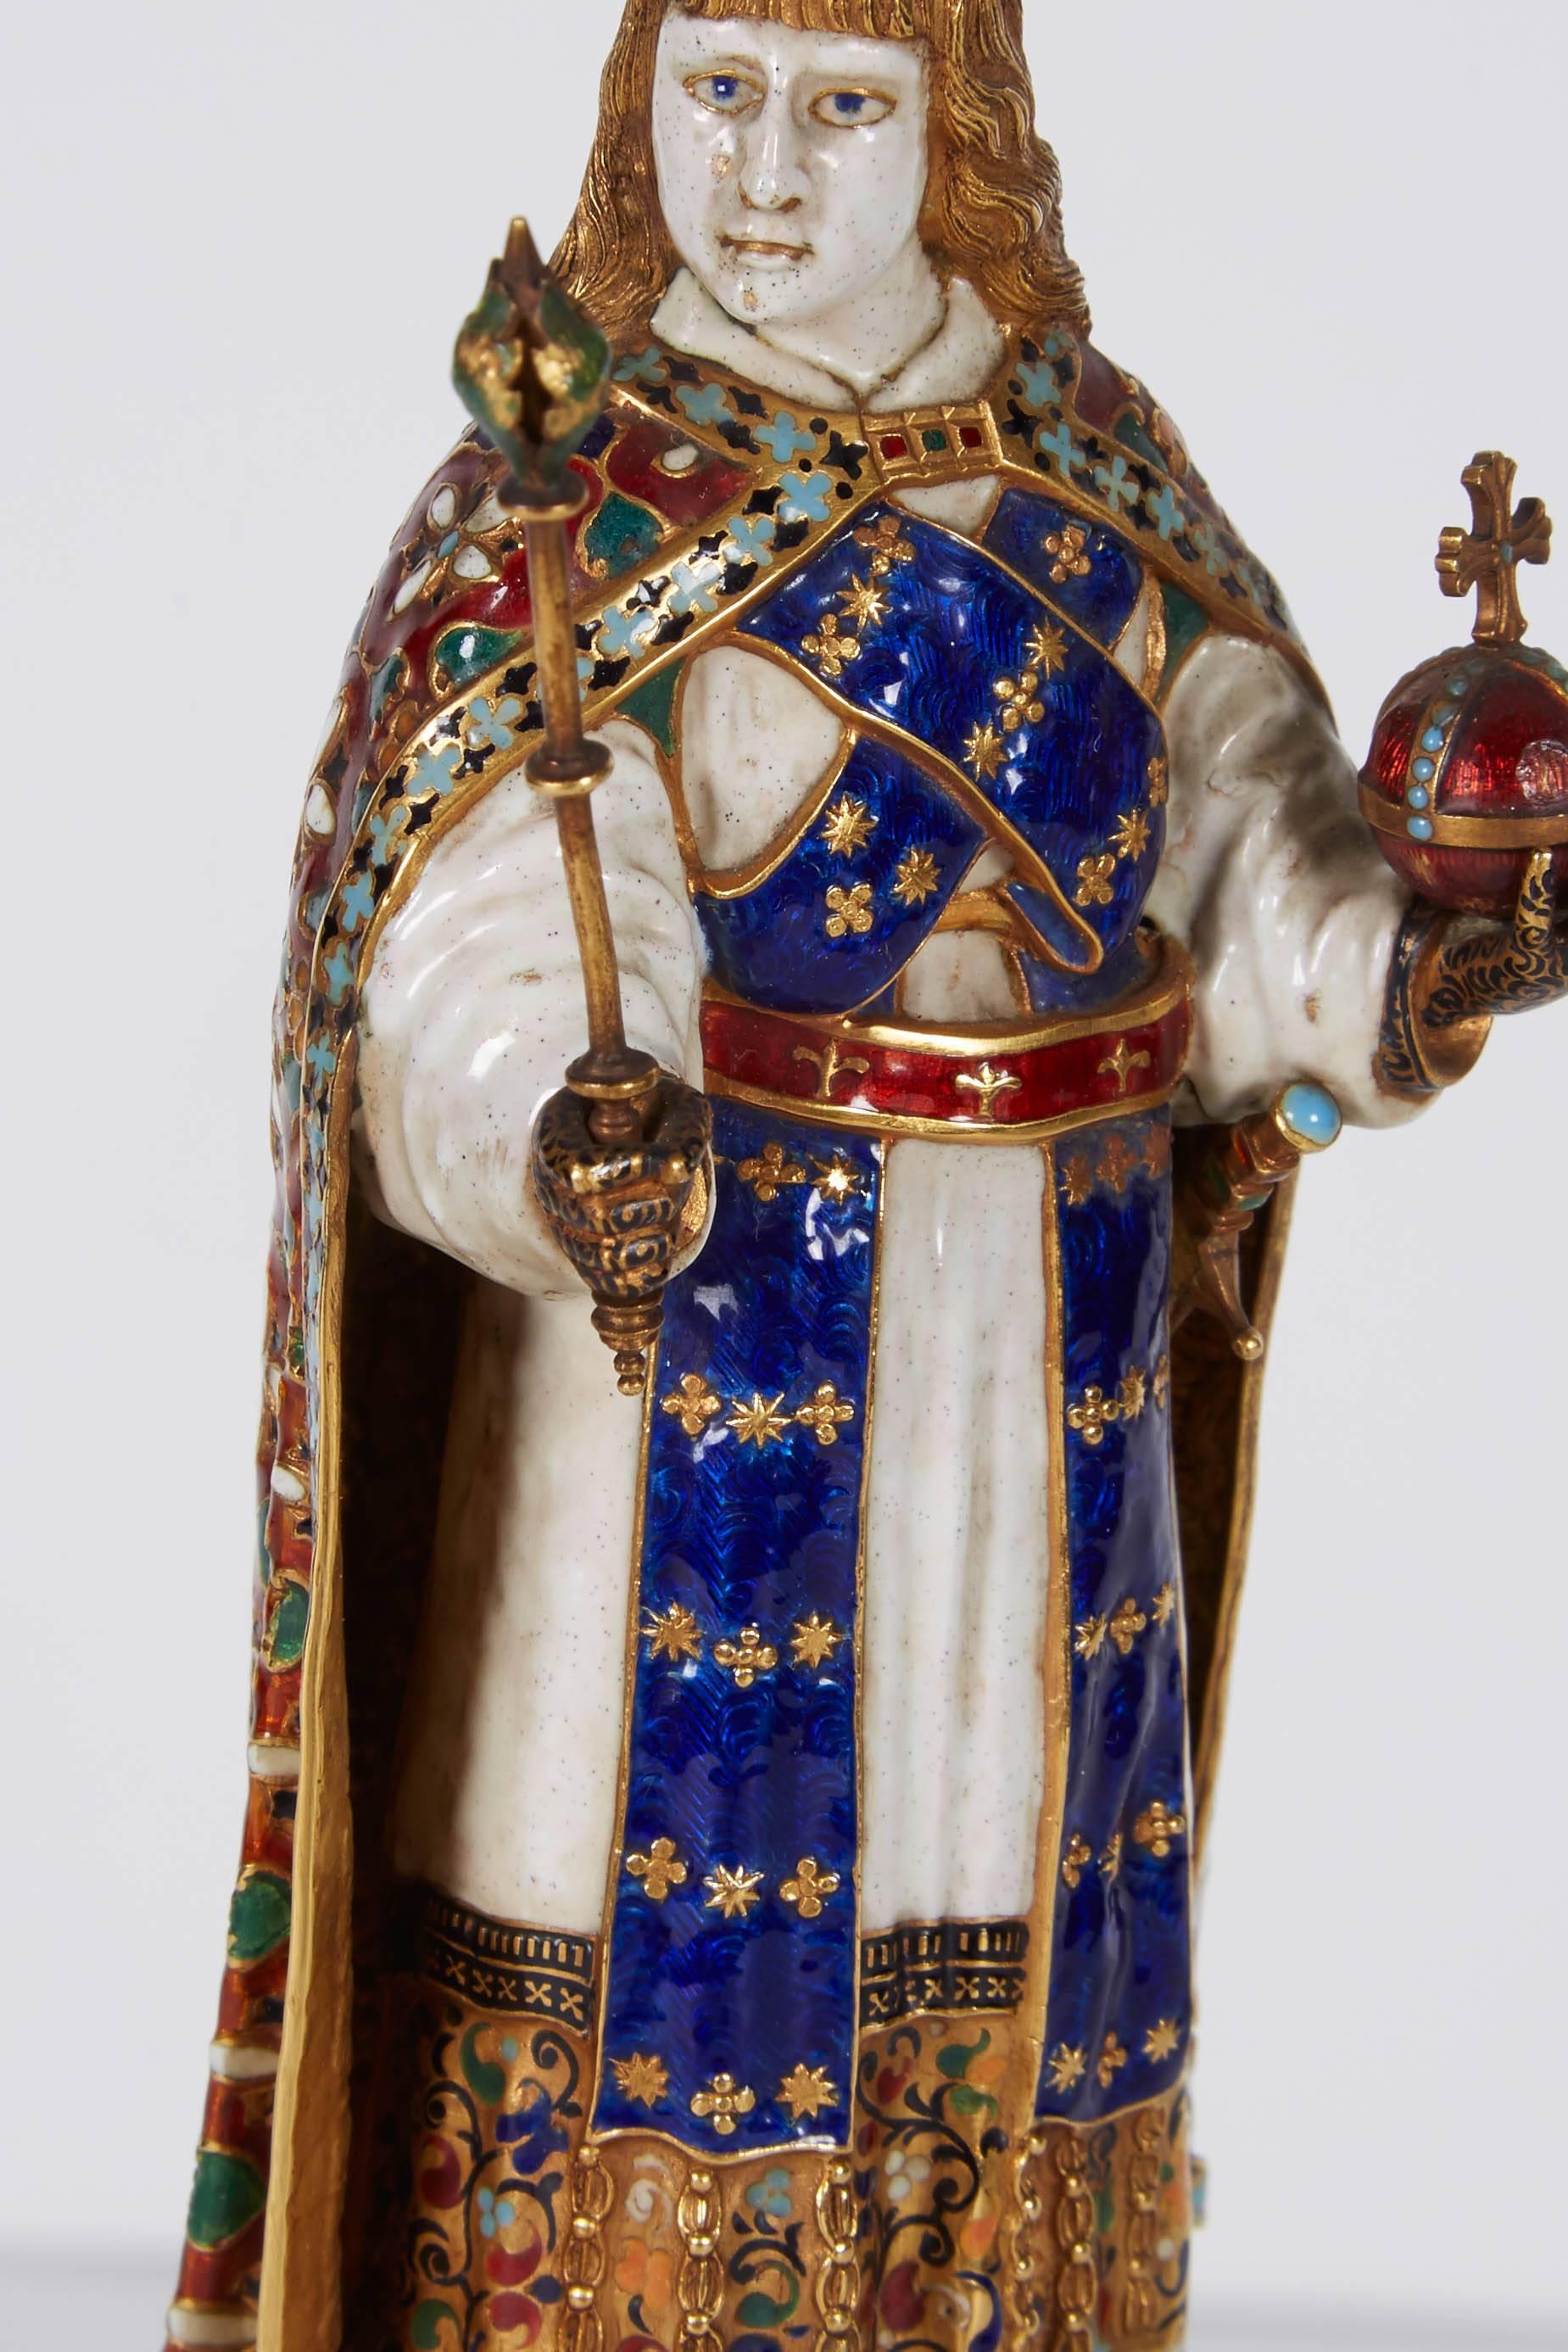 19th Century Enamel Gold and Rock Crystal Figure of Emperor Maximilian I by Reinhold Vasters For Sale